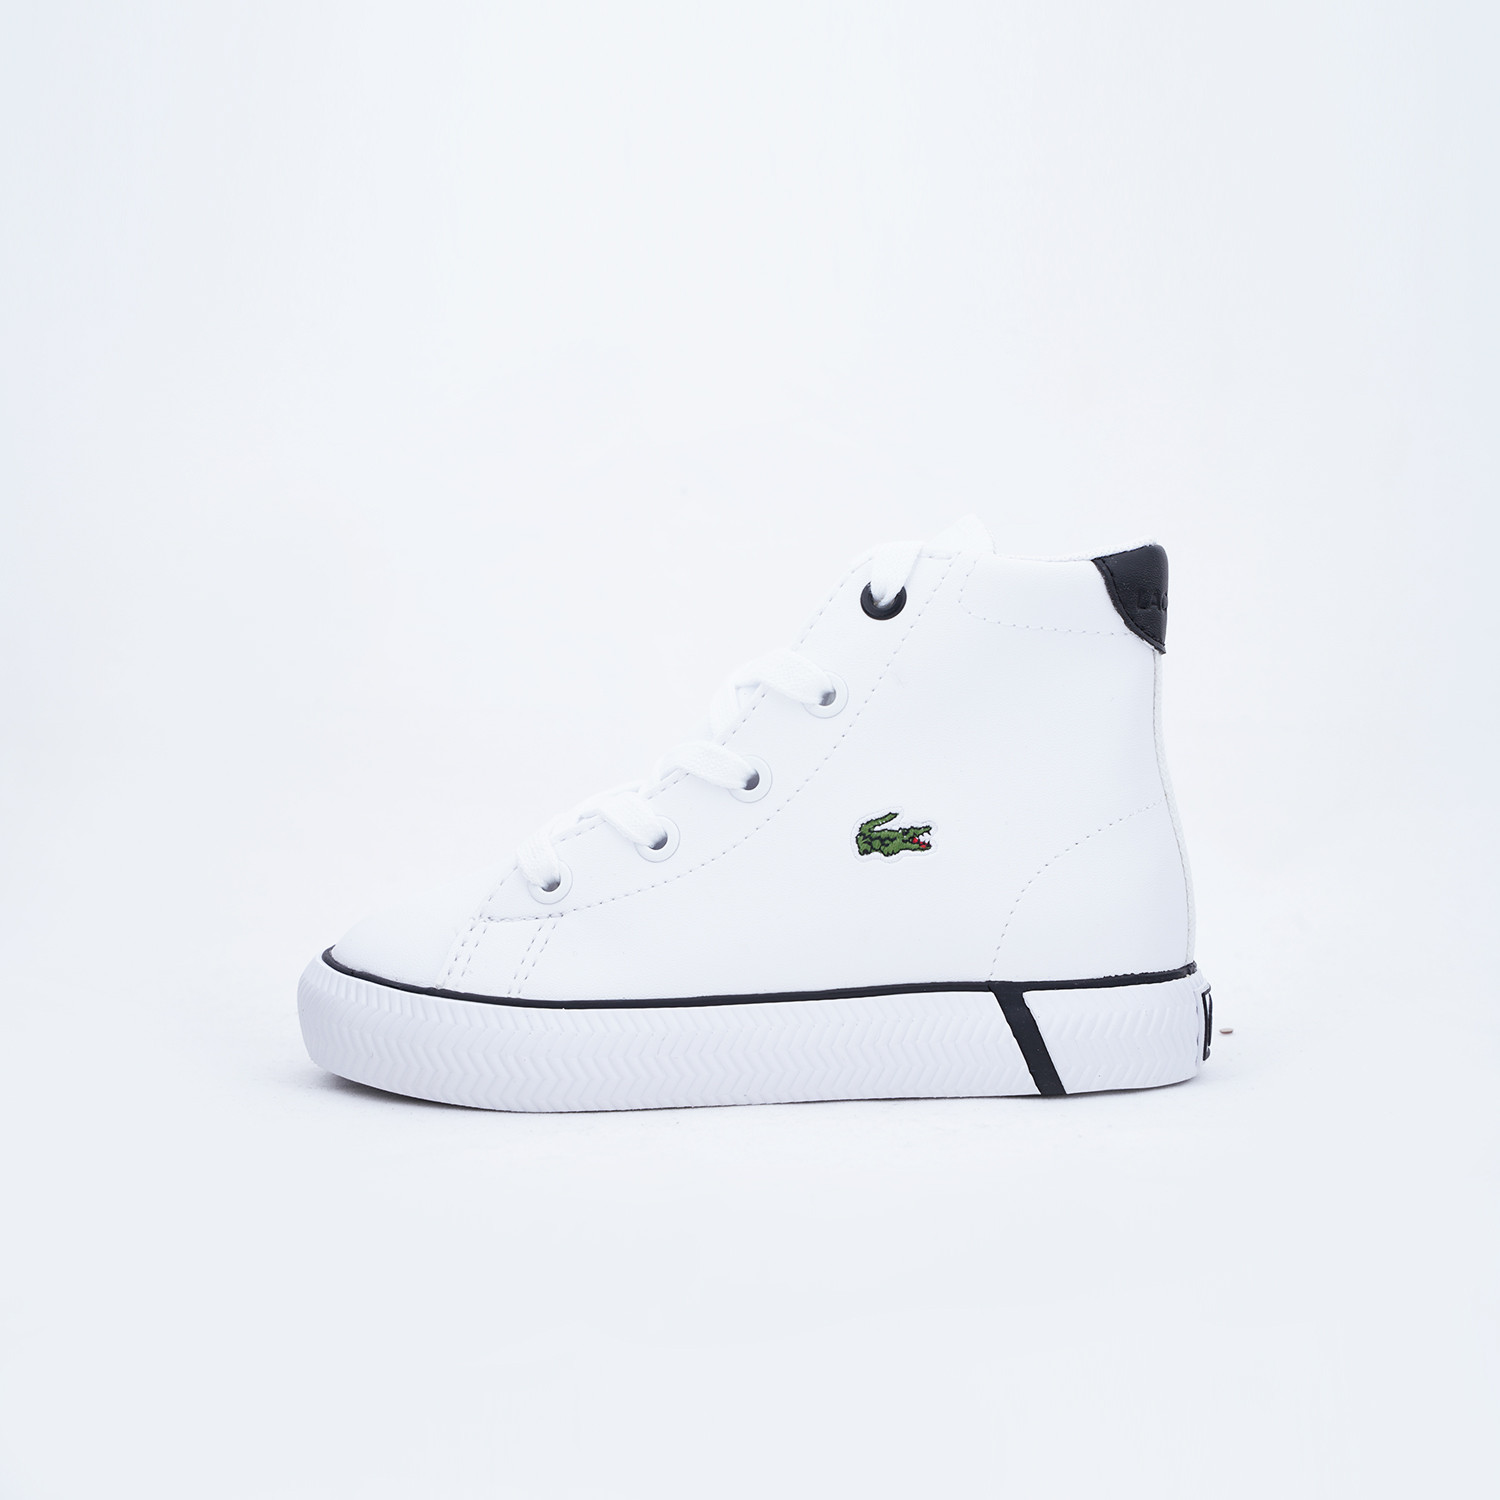 Lacoste Gripshot Βρεφικά Μποτάκια (9000091788_13598)